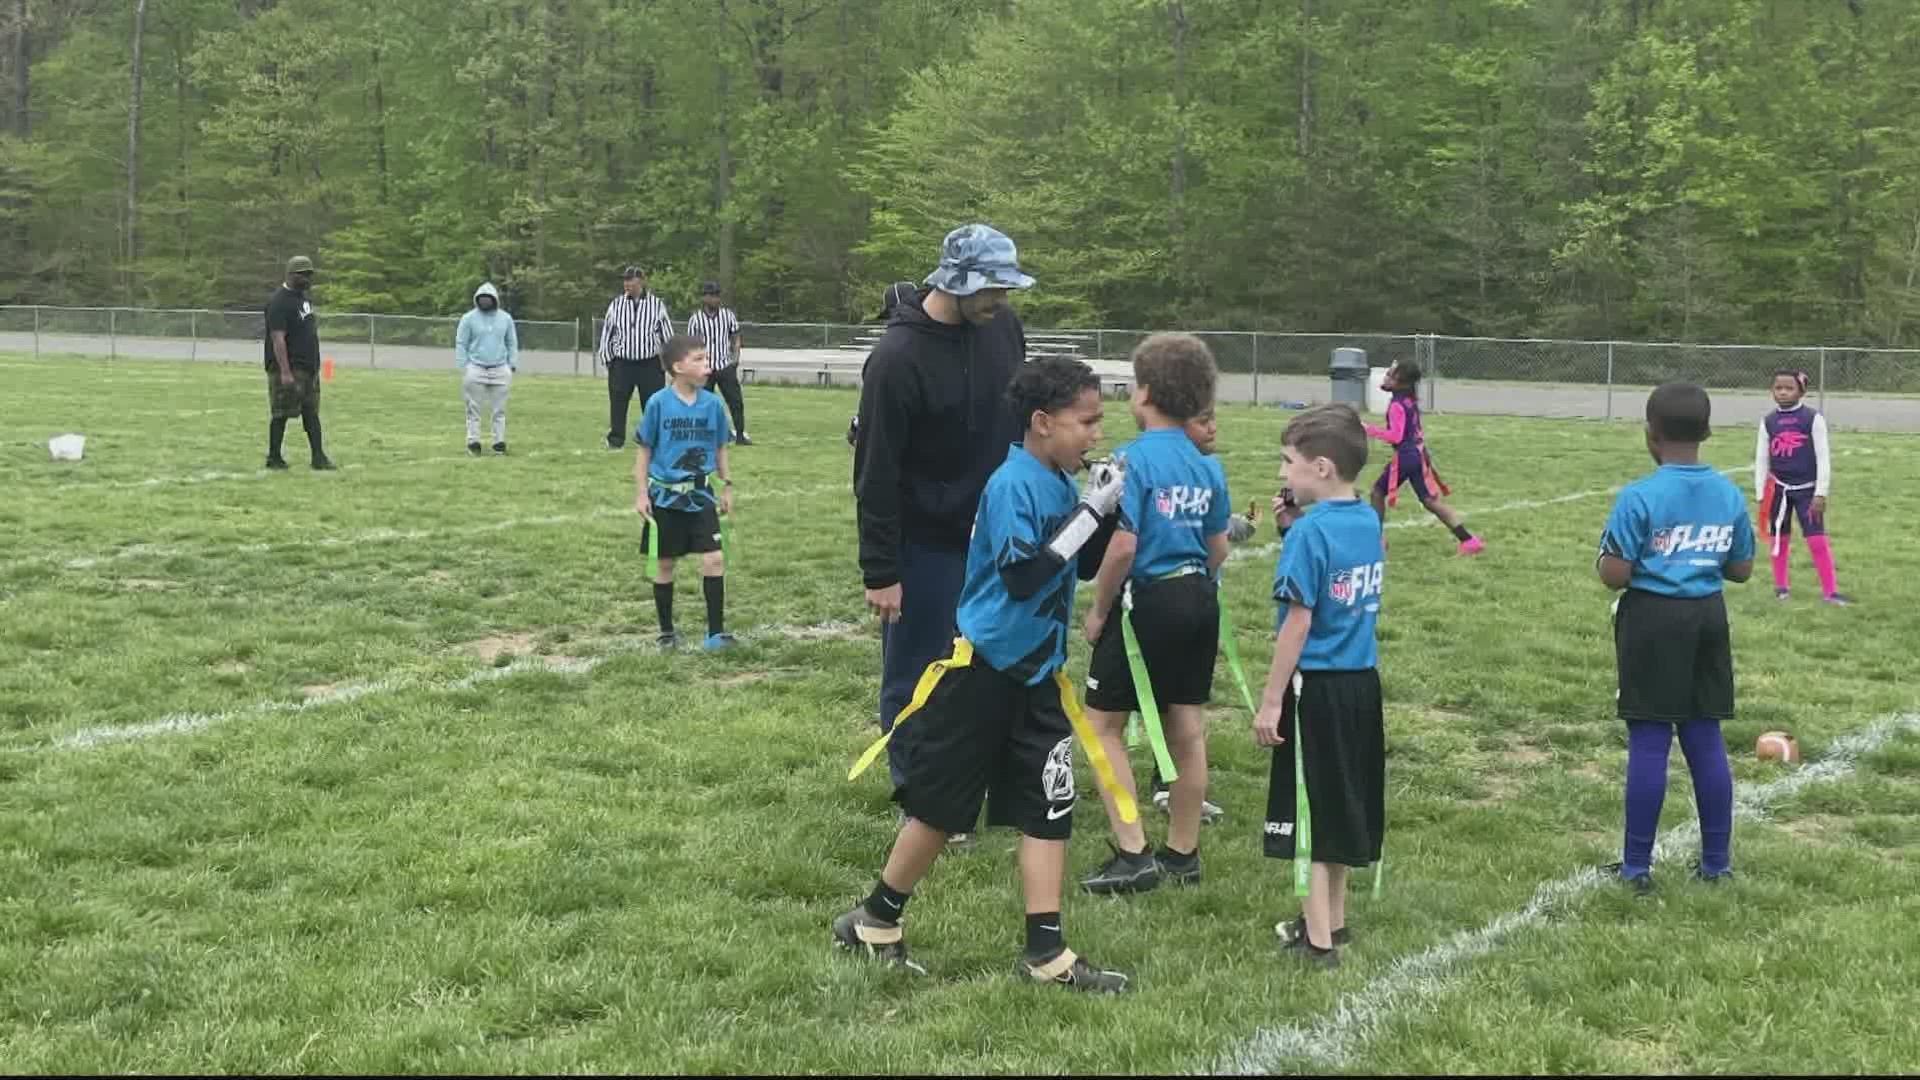 One father of a child playing flag football said he was baffled that someone would open fire, especially in an area where children were at play.